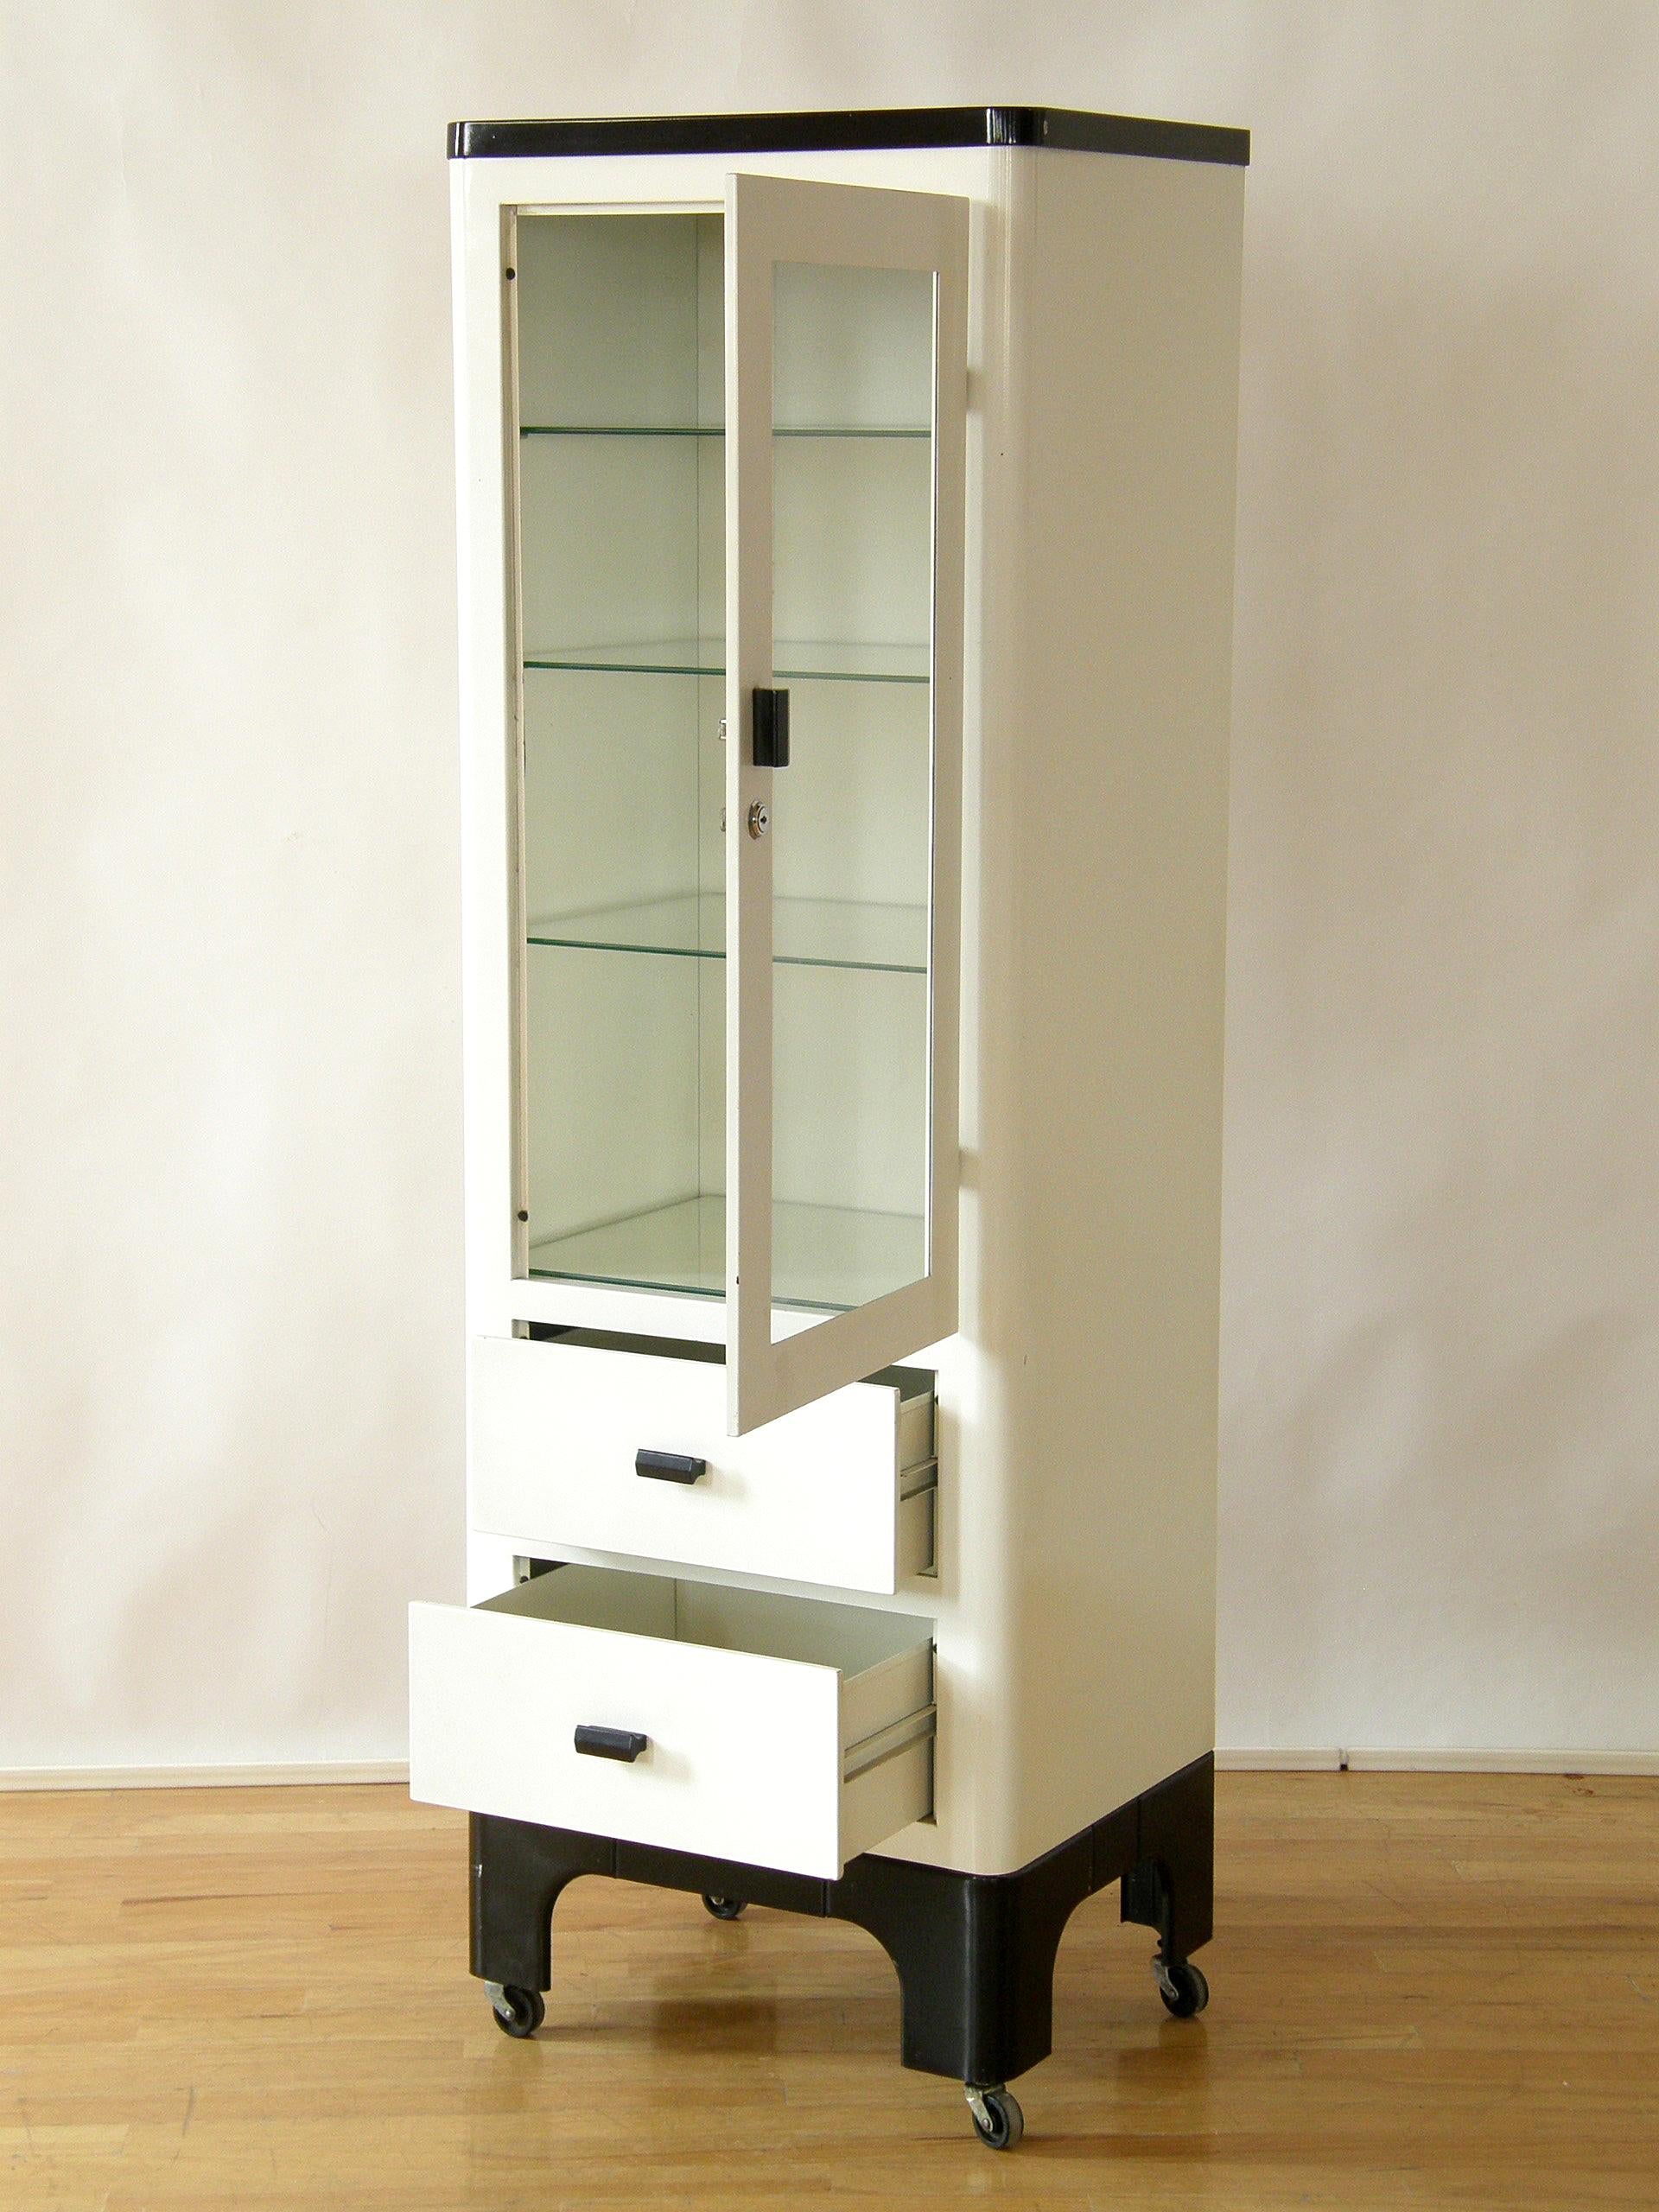 This tall, circa 1930s medical cabinet has a Machine Age, modernist style with sleek rounded corners, a white enameled steel body, and black enamel top and base. The storage includes an area with three adjustable glass shelves behind a locking,